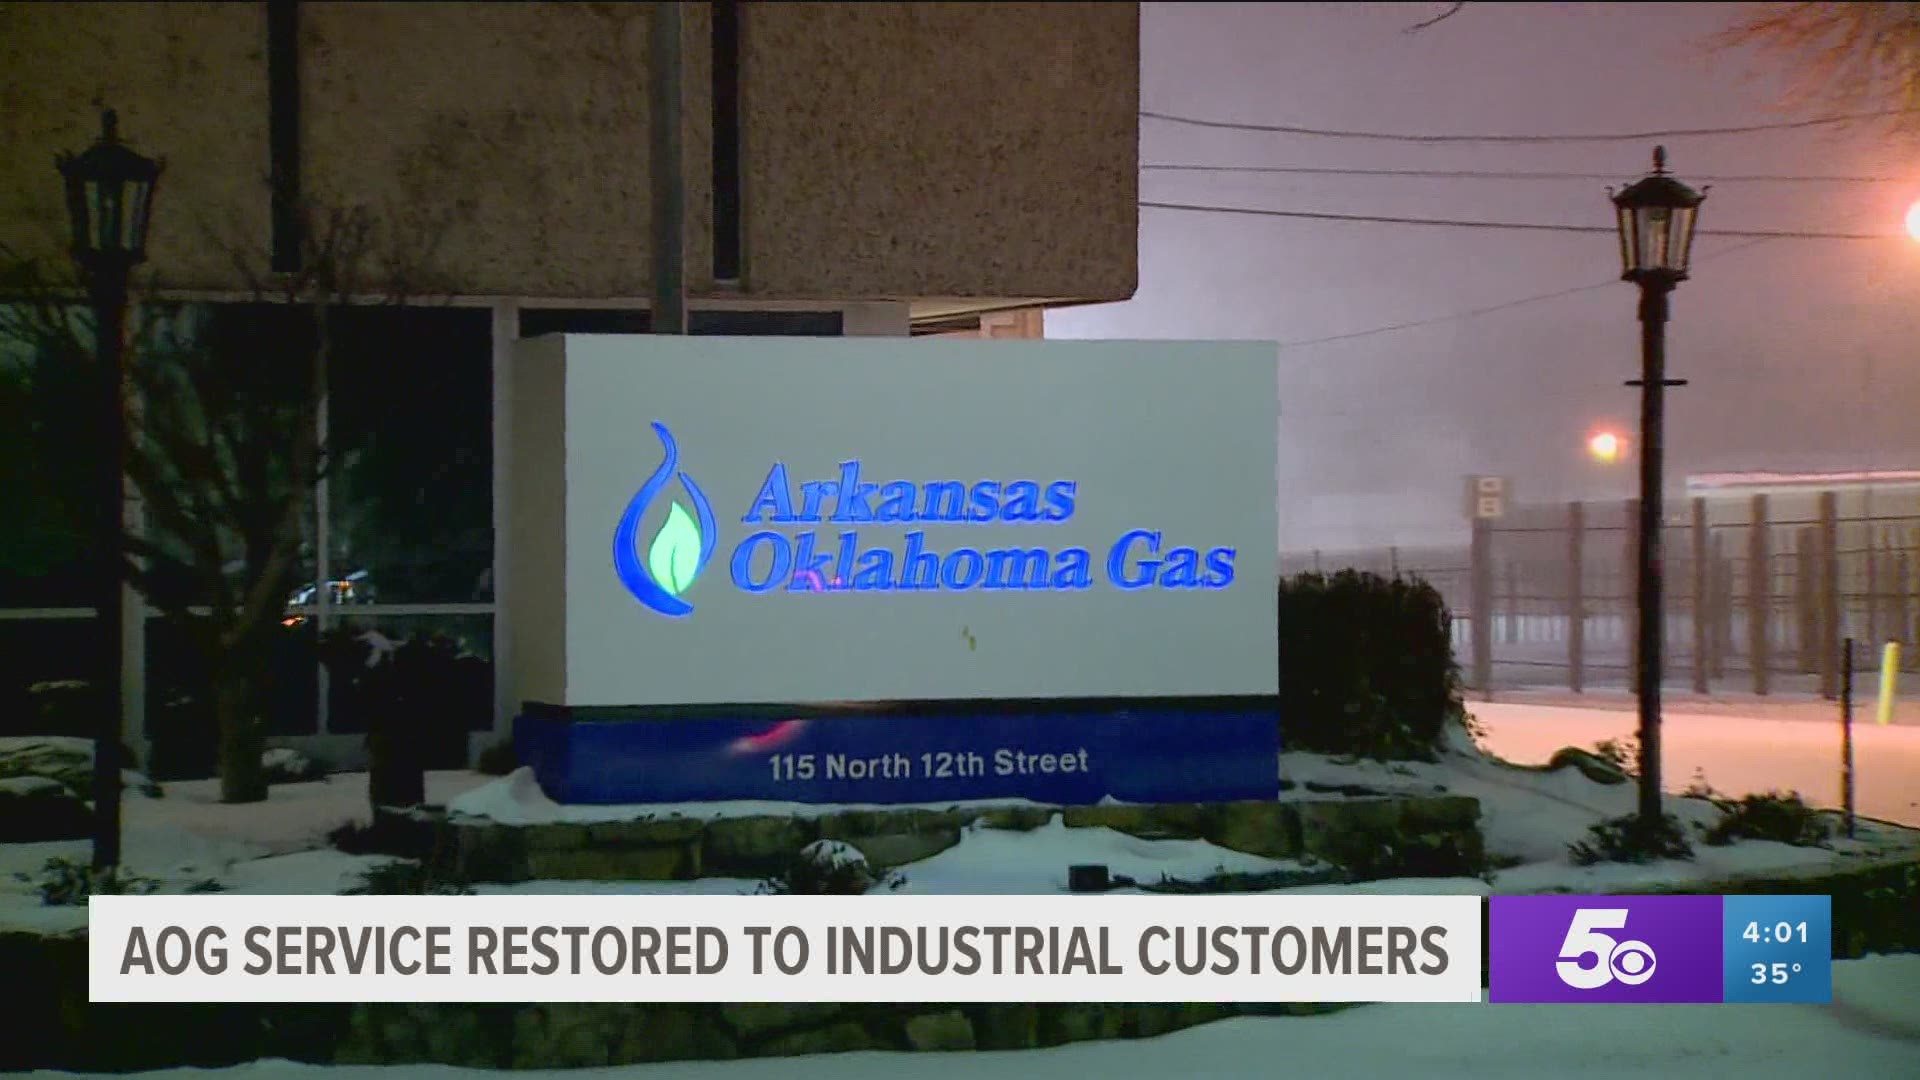 AOG has lifted the natural gas curtailment order for industrial businesses in Fort Smith.